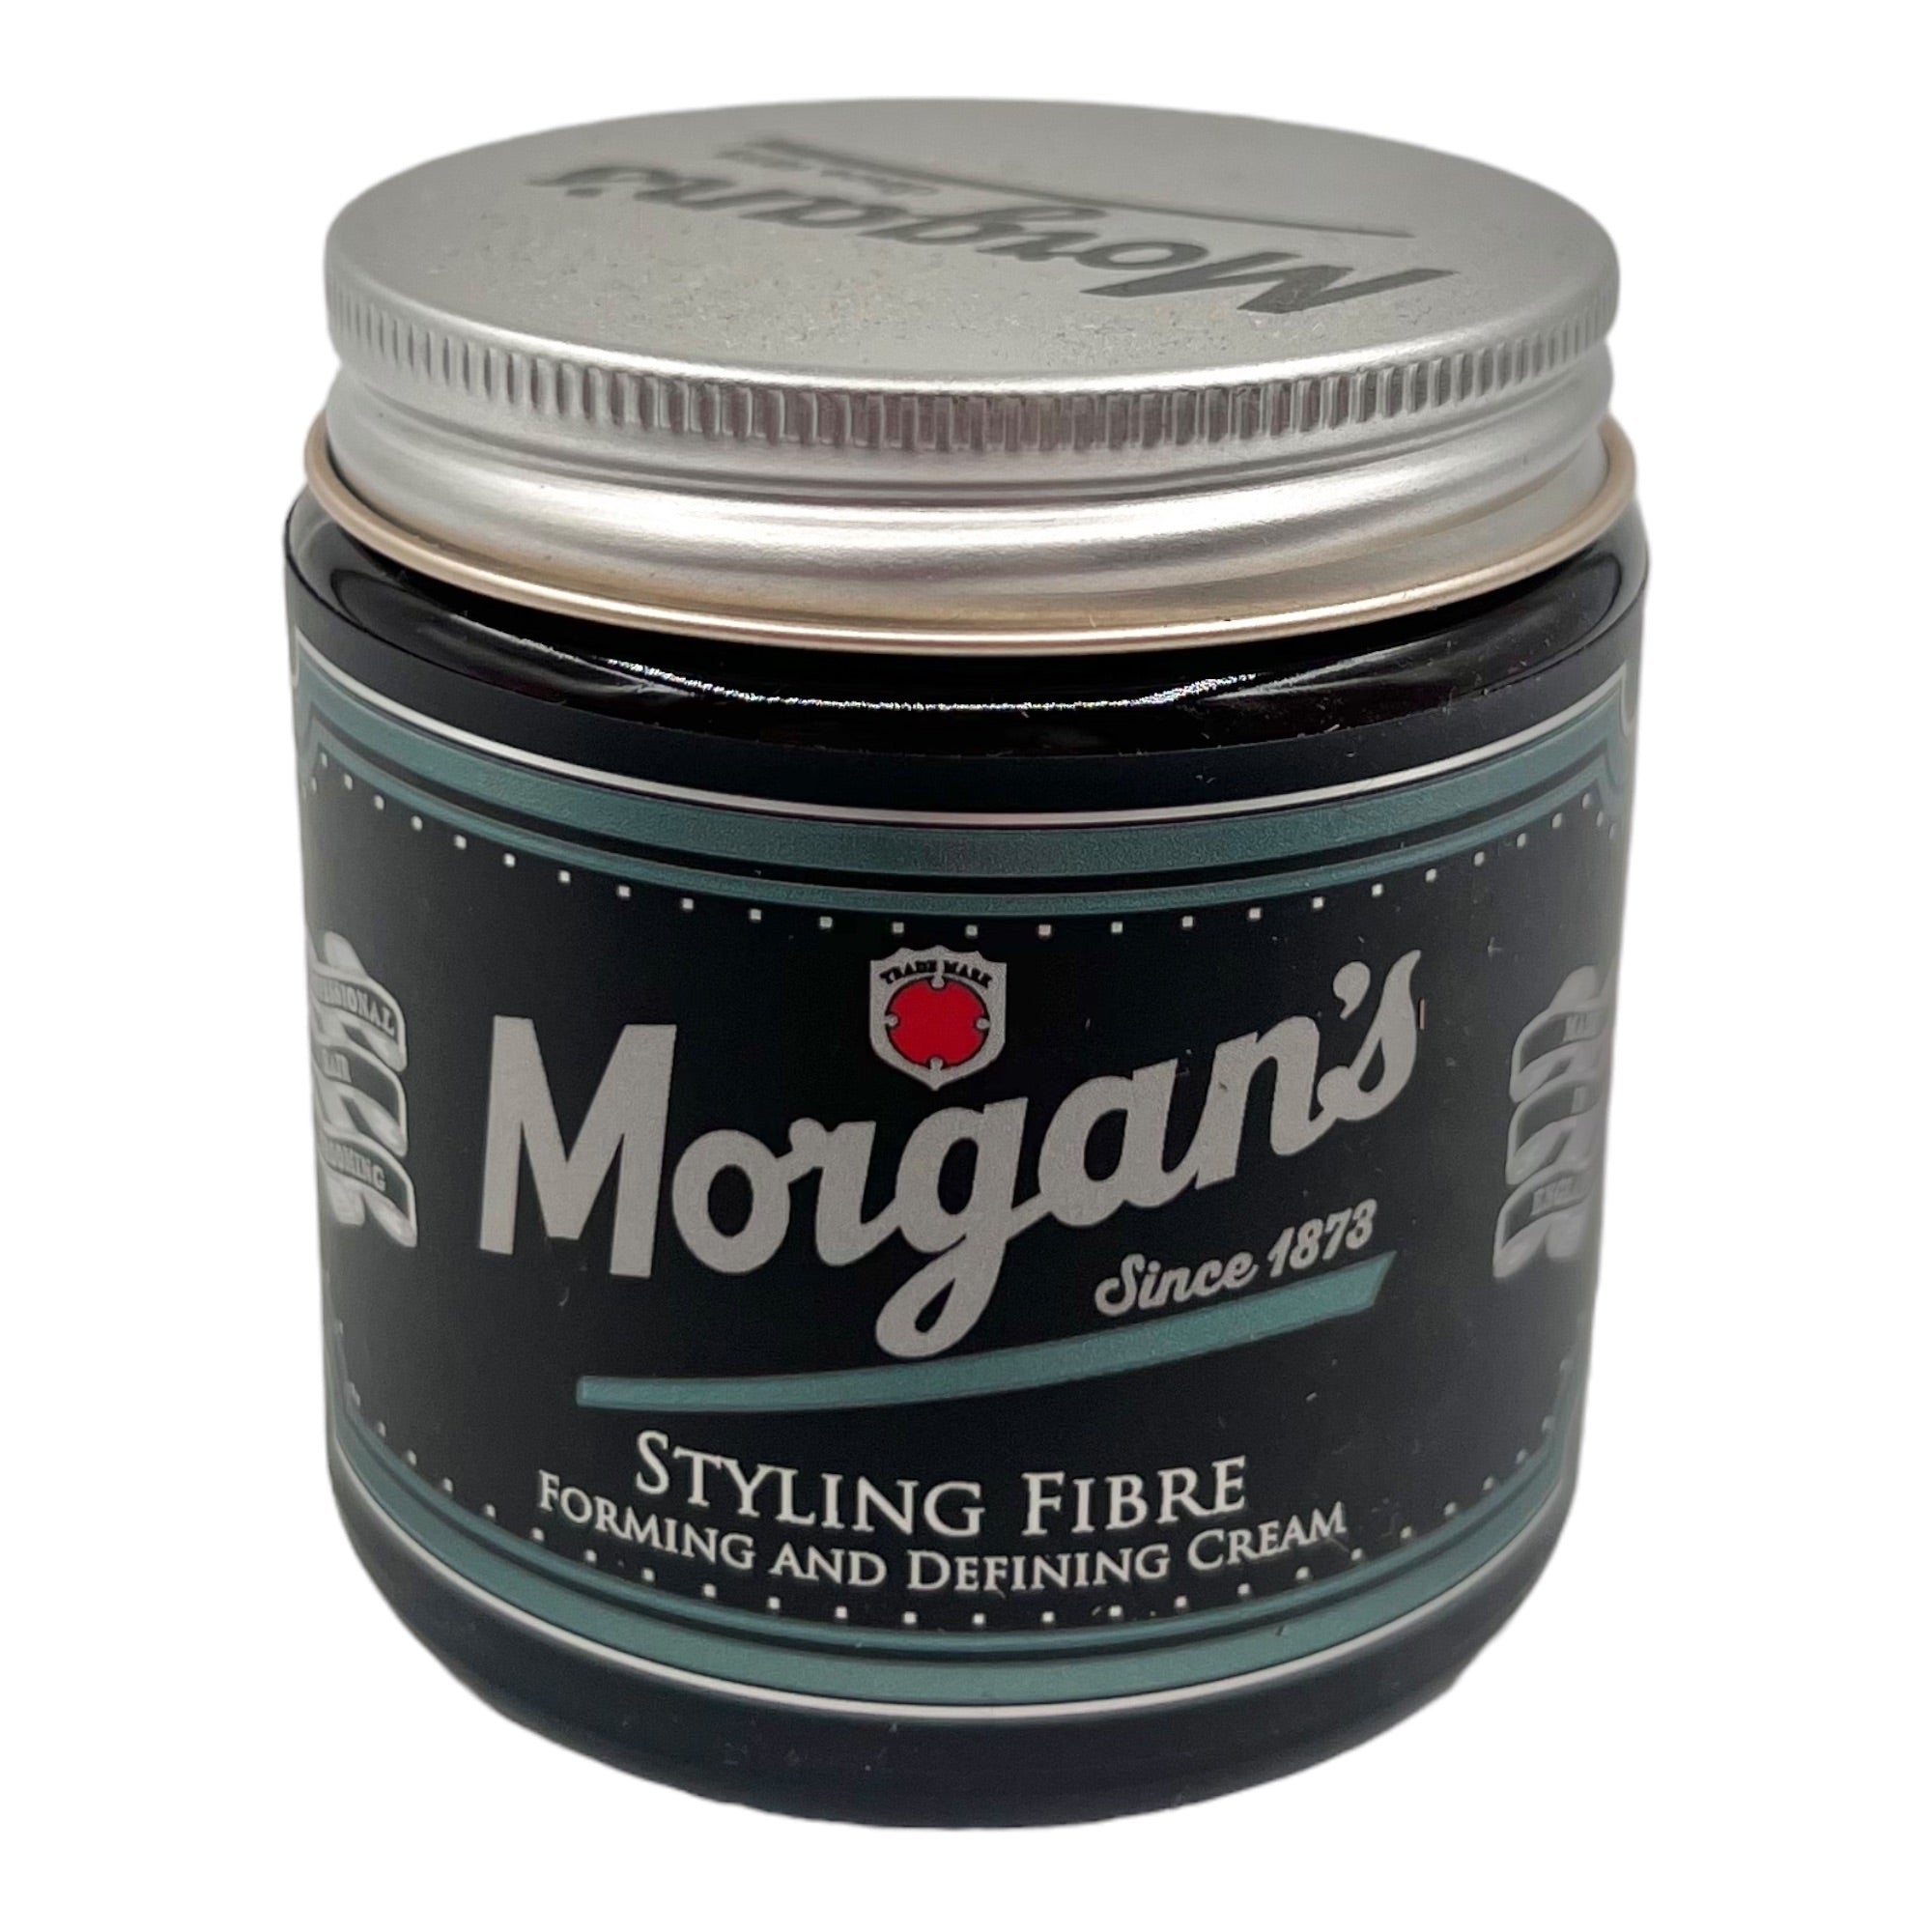 Morgan's - Styling Fibre Forming and Defining Cream 120ml